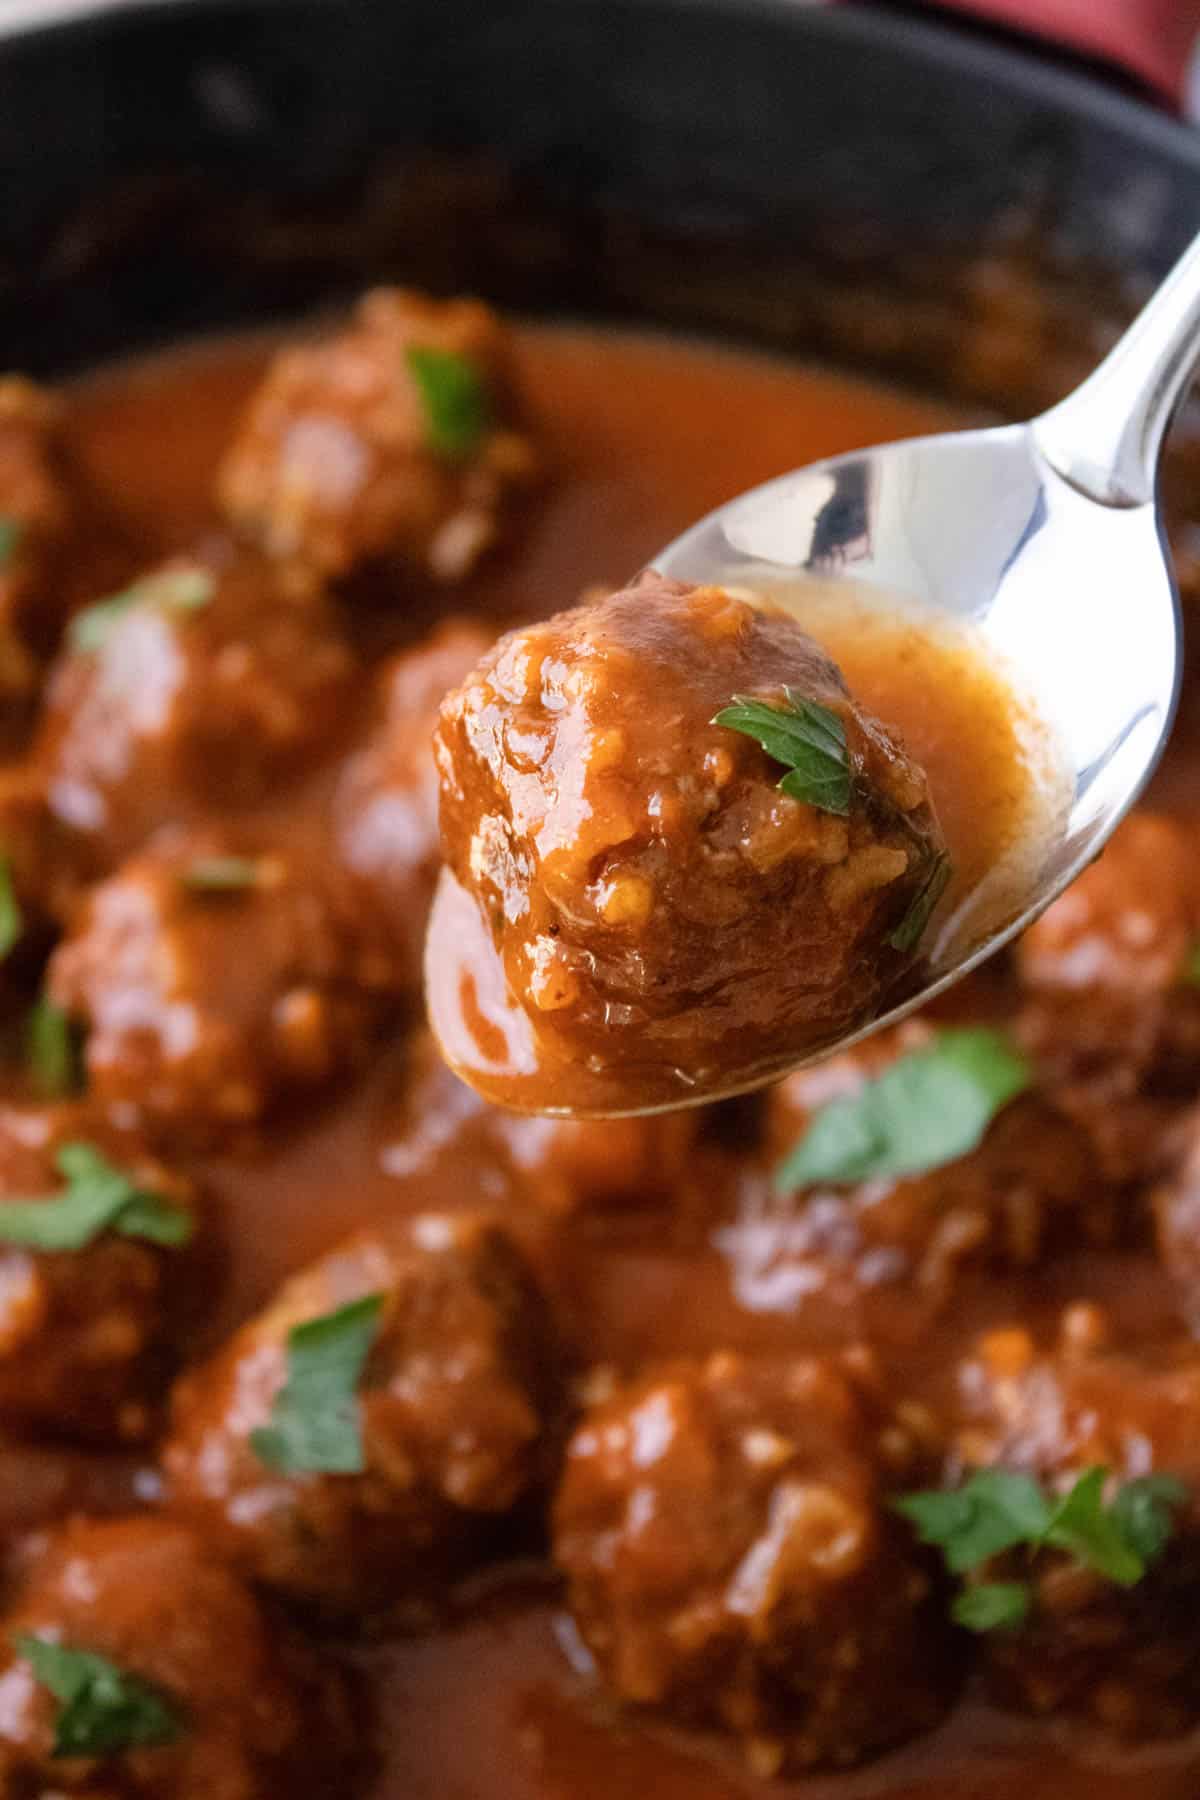 A spoon lifting a porcupine meatball out of the sauce.